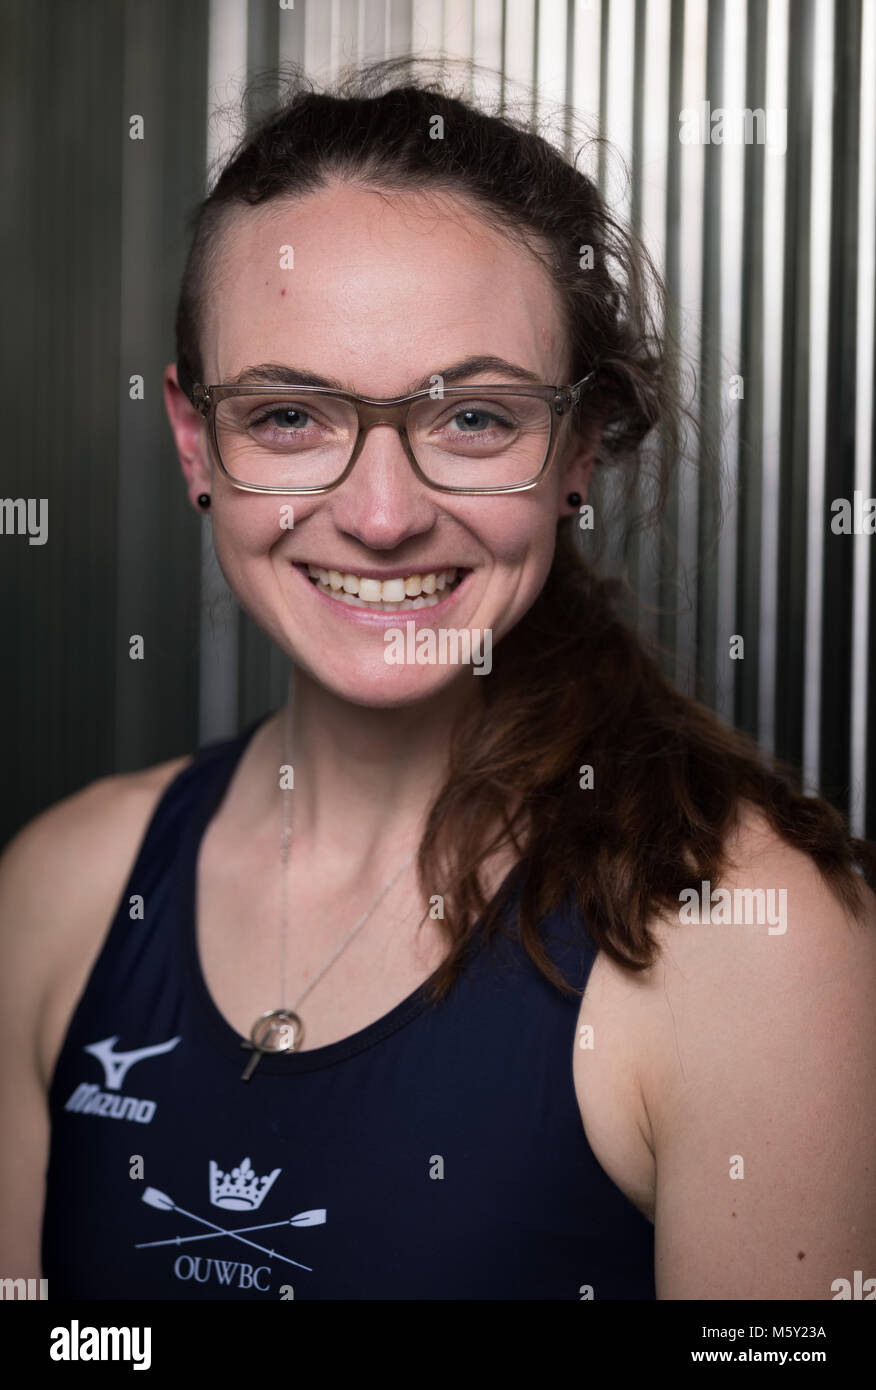 Oxford women's Katherine Erickson during the Boat Race crew announcement and weigh in media day at City Hall, London. PRESS ASSOCIATION Photo. Picture date: Monday February 26, 2018. Photo credit should read: John Walton/PA Wire Stock Photo